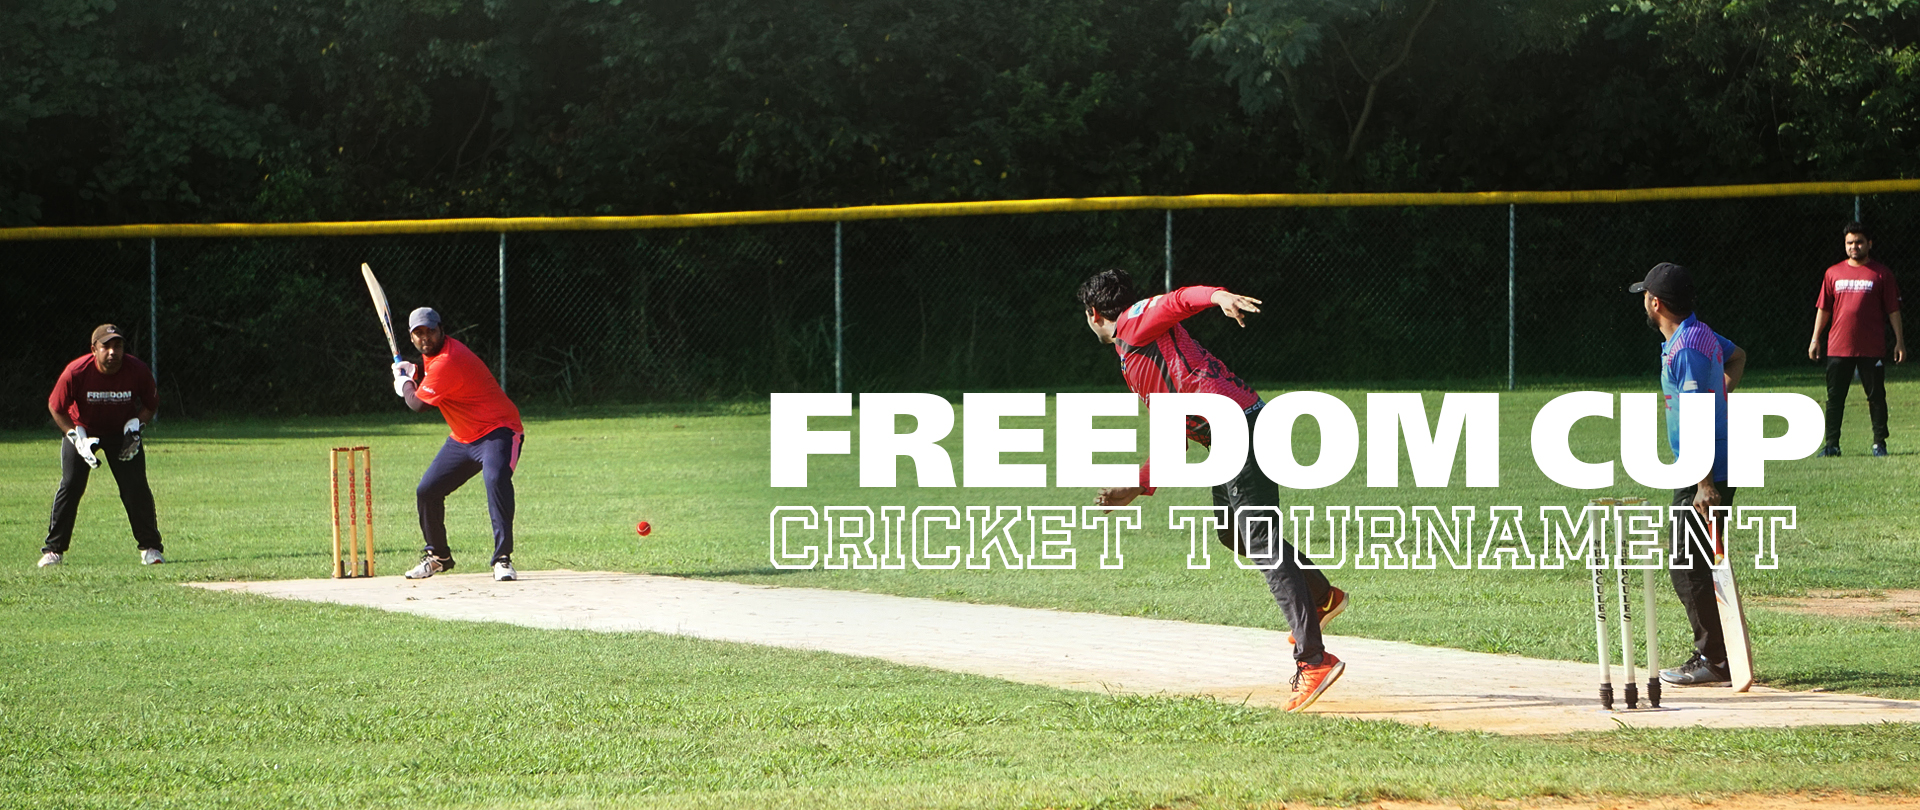 Freedom Cup Cricket
Saturdays, July 9 – August 13
